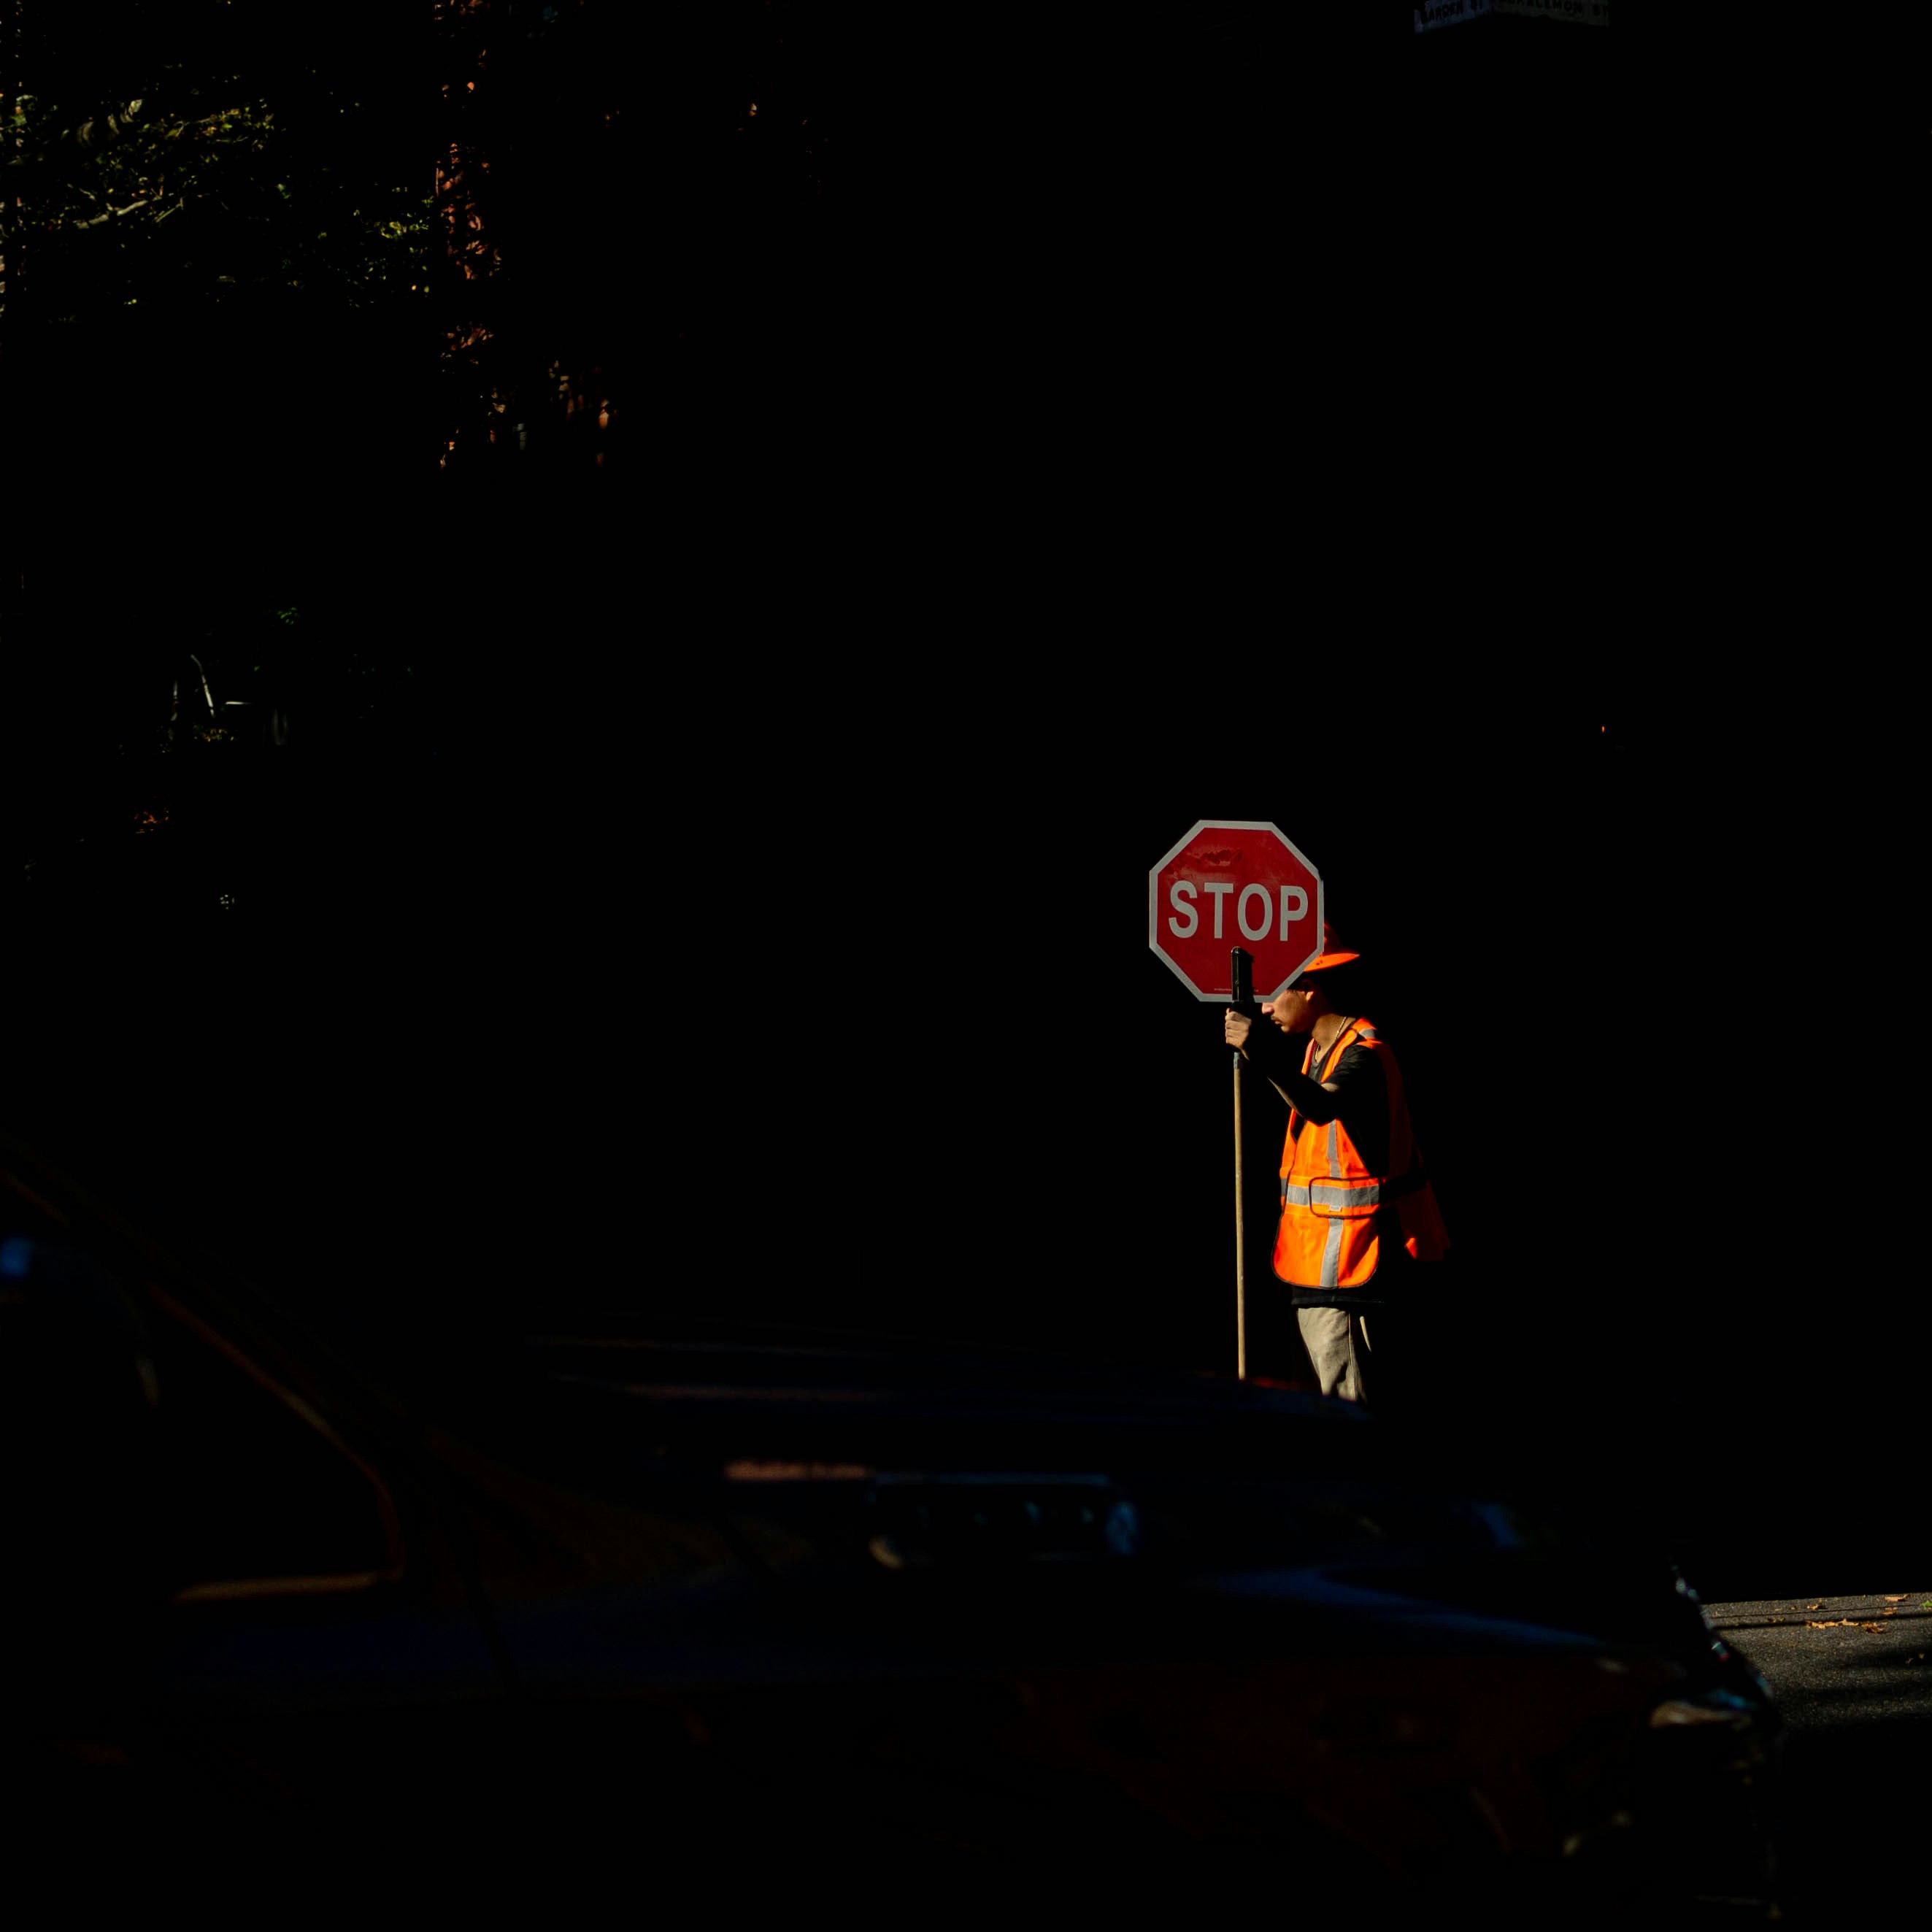 Taken in Brooklyn, NY Love these guys with their stopping boards. Got lucky with the lighting on this one!